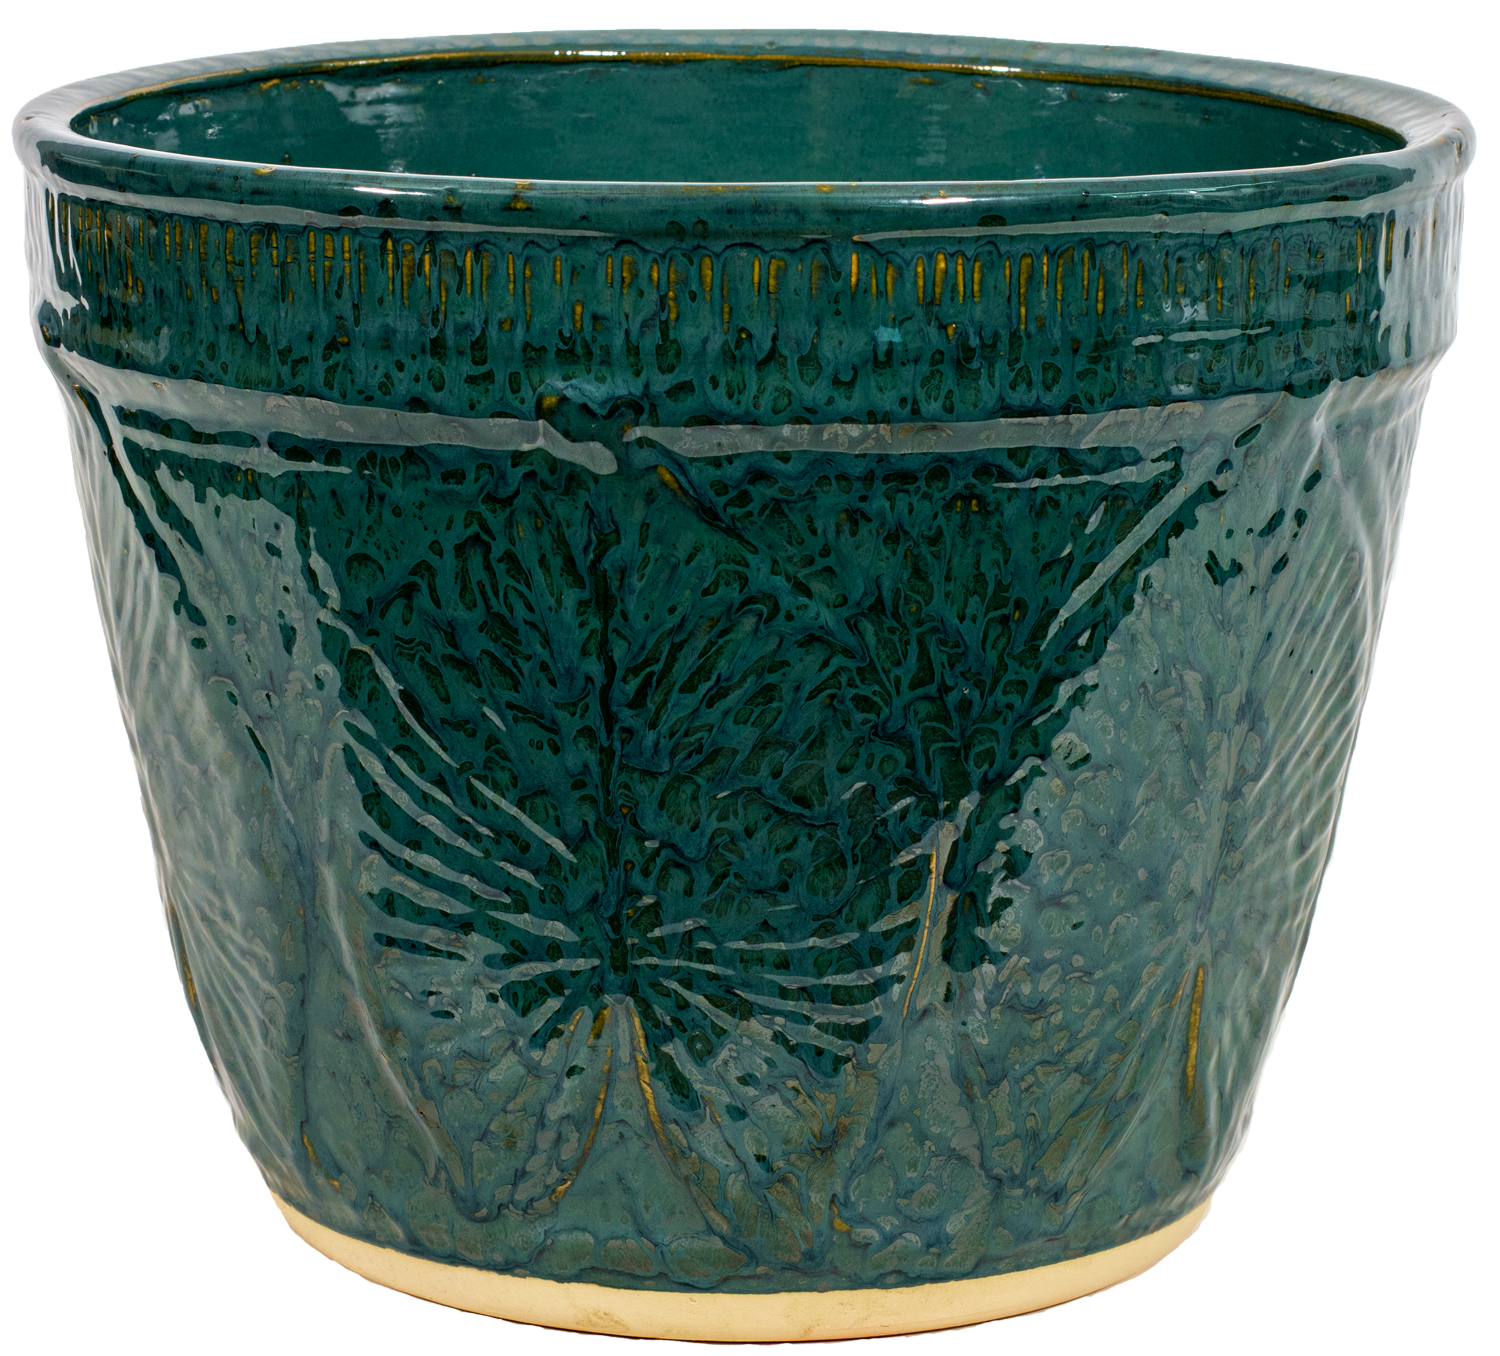 Large outdoor patio planter in green glaze with leaf design